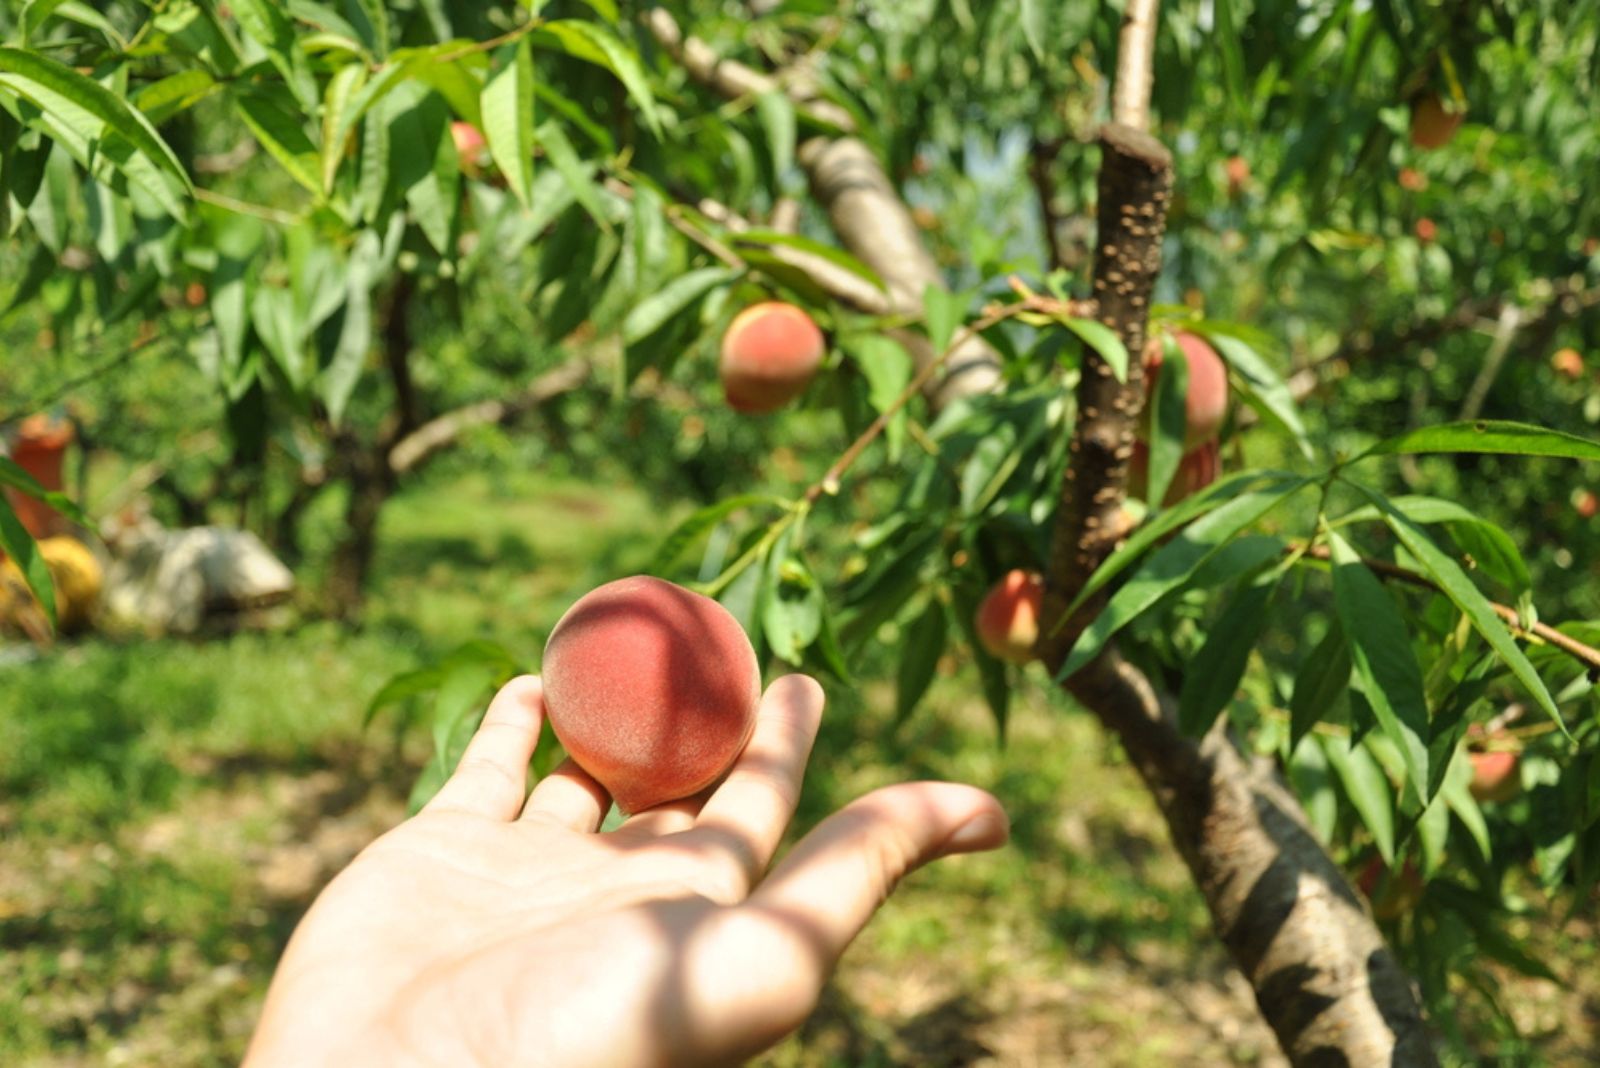 human hand holding peach from tree